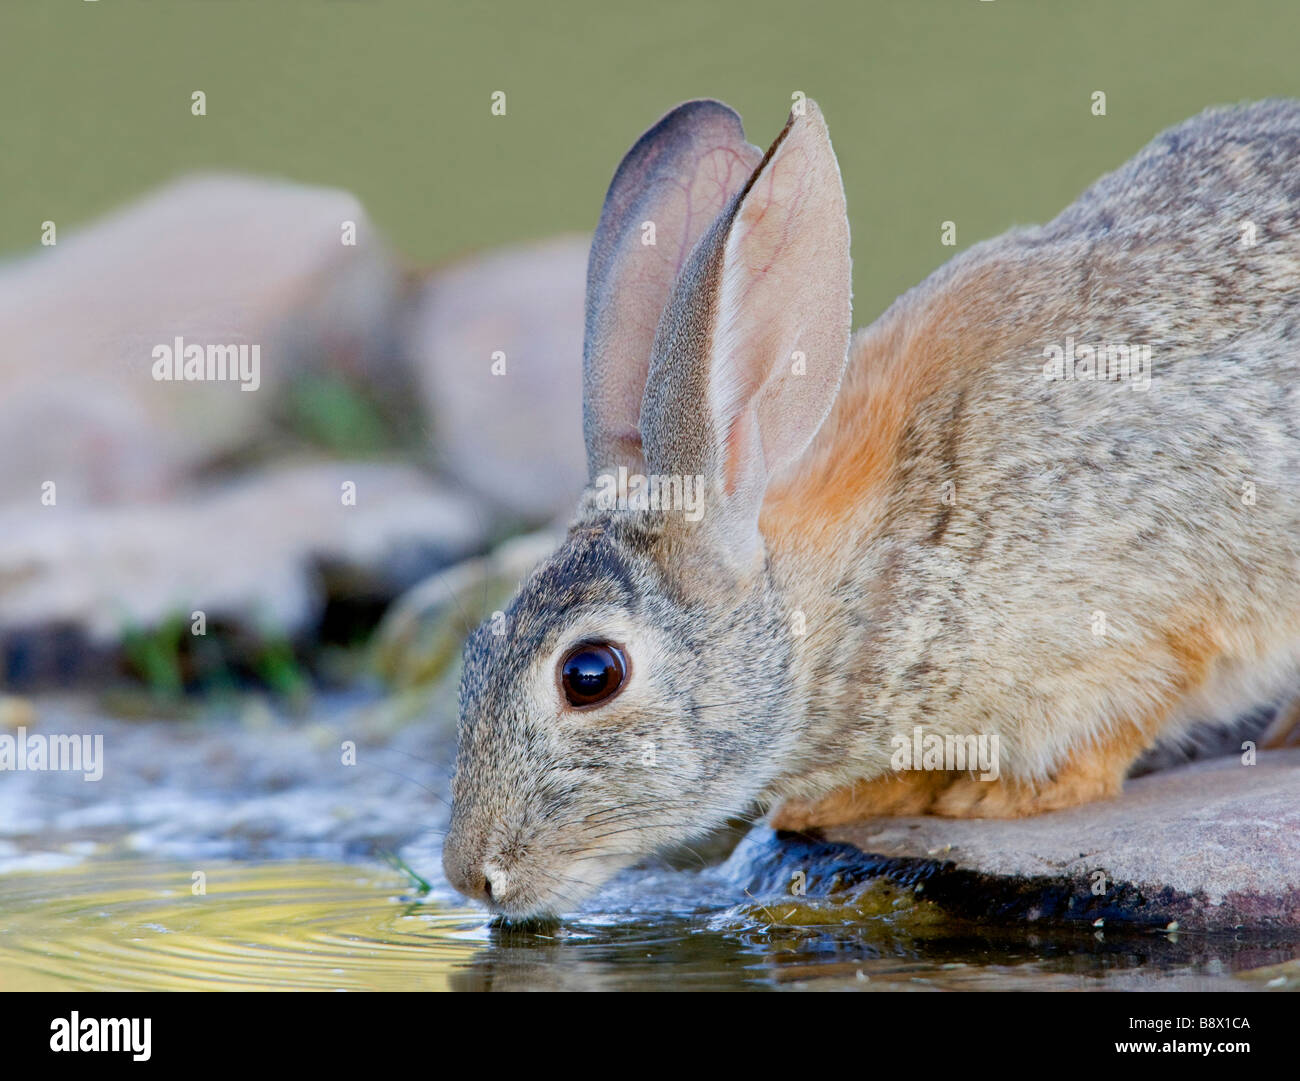 Rabbit (Oryctolagus cuniculus) drinking water from a pond Stock Photo